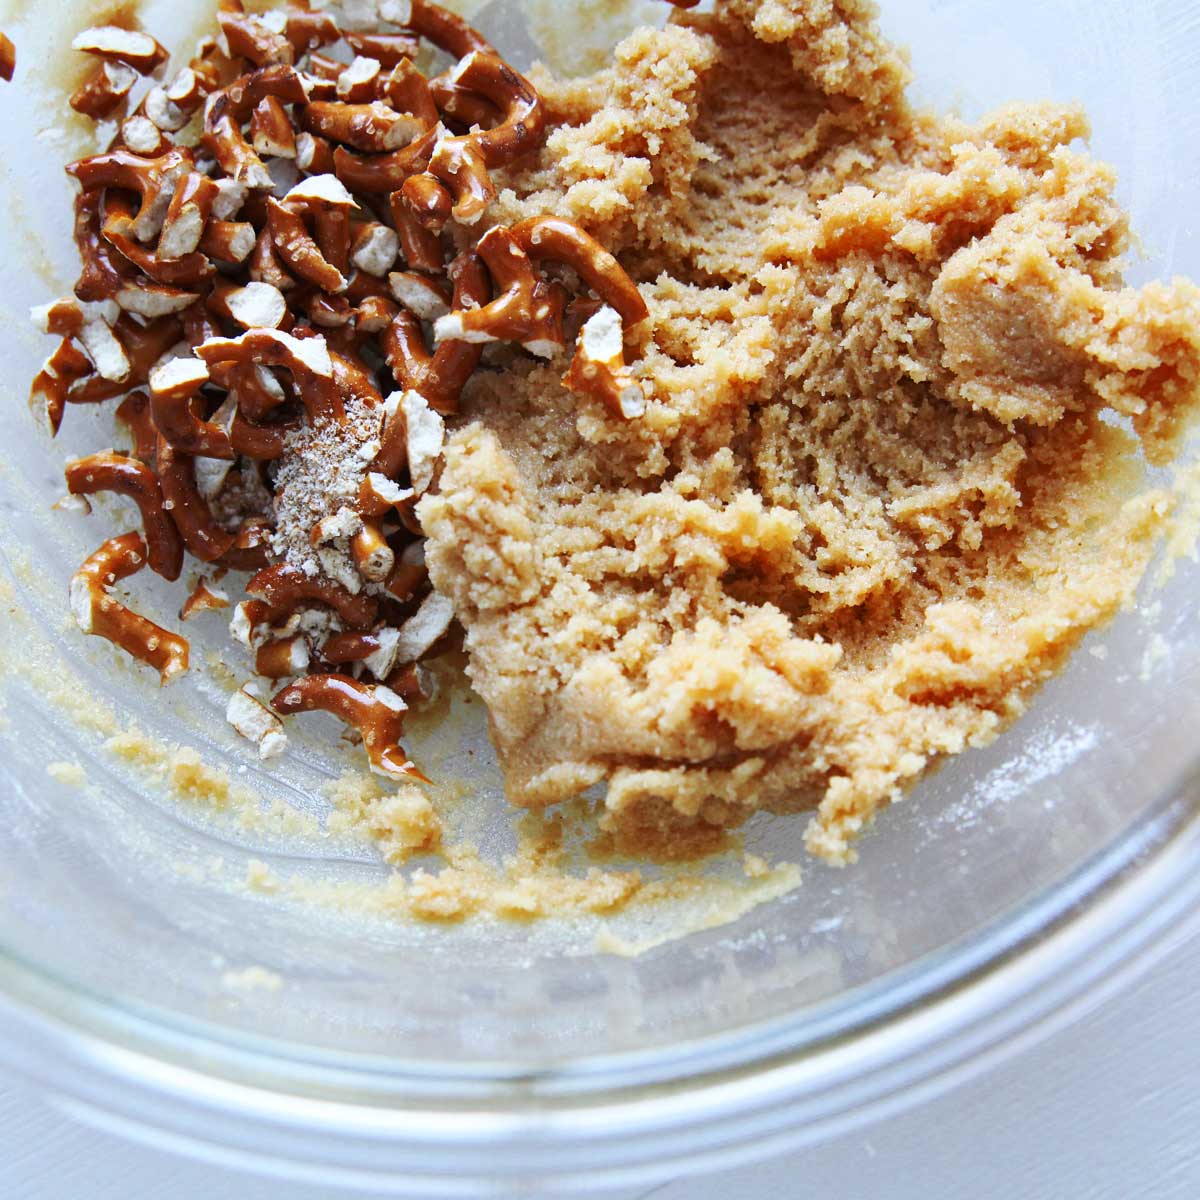 Sweet and Salty Peanut Butter Collagen Protein Balls with Pretzels - Peanut Butter Collagen Protein Balls